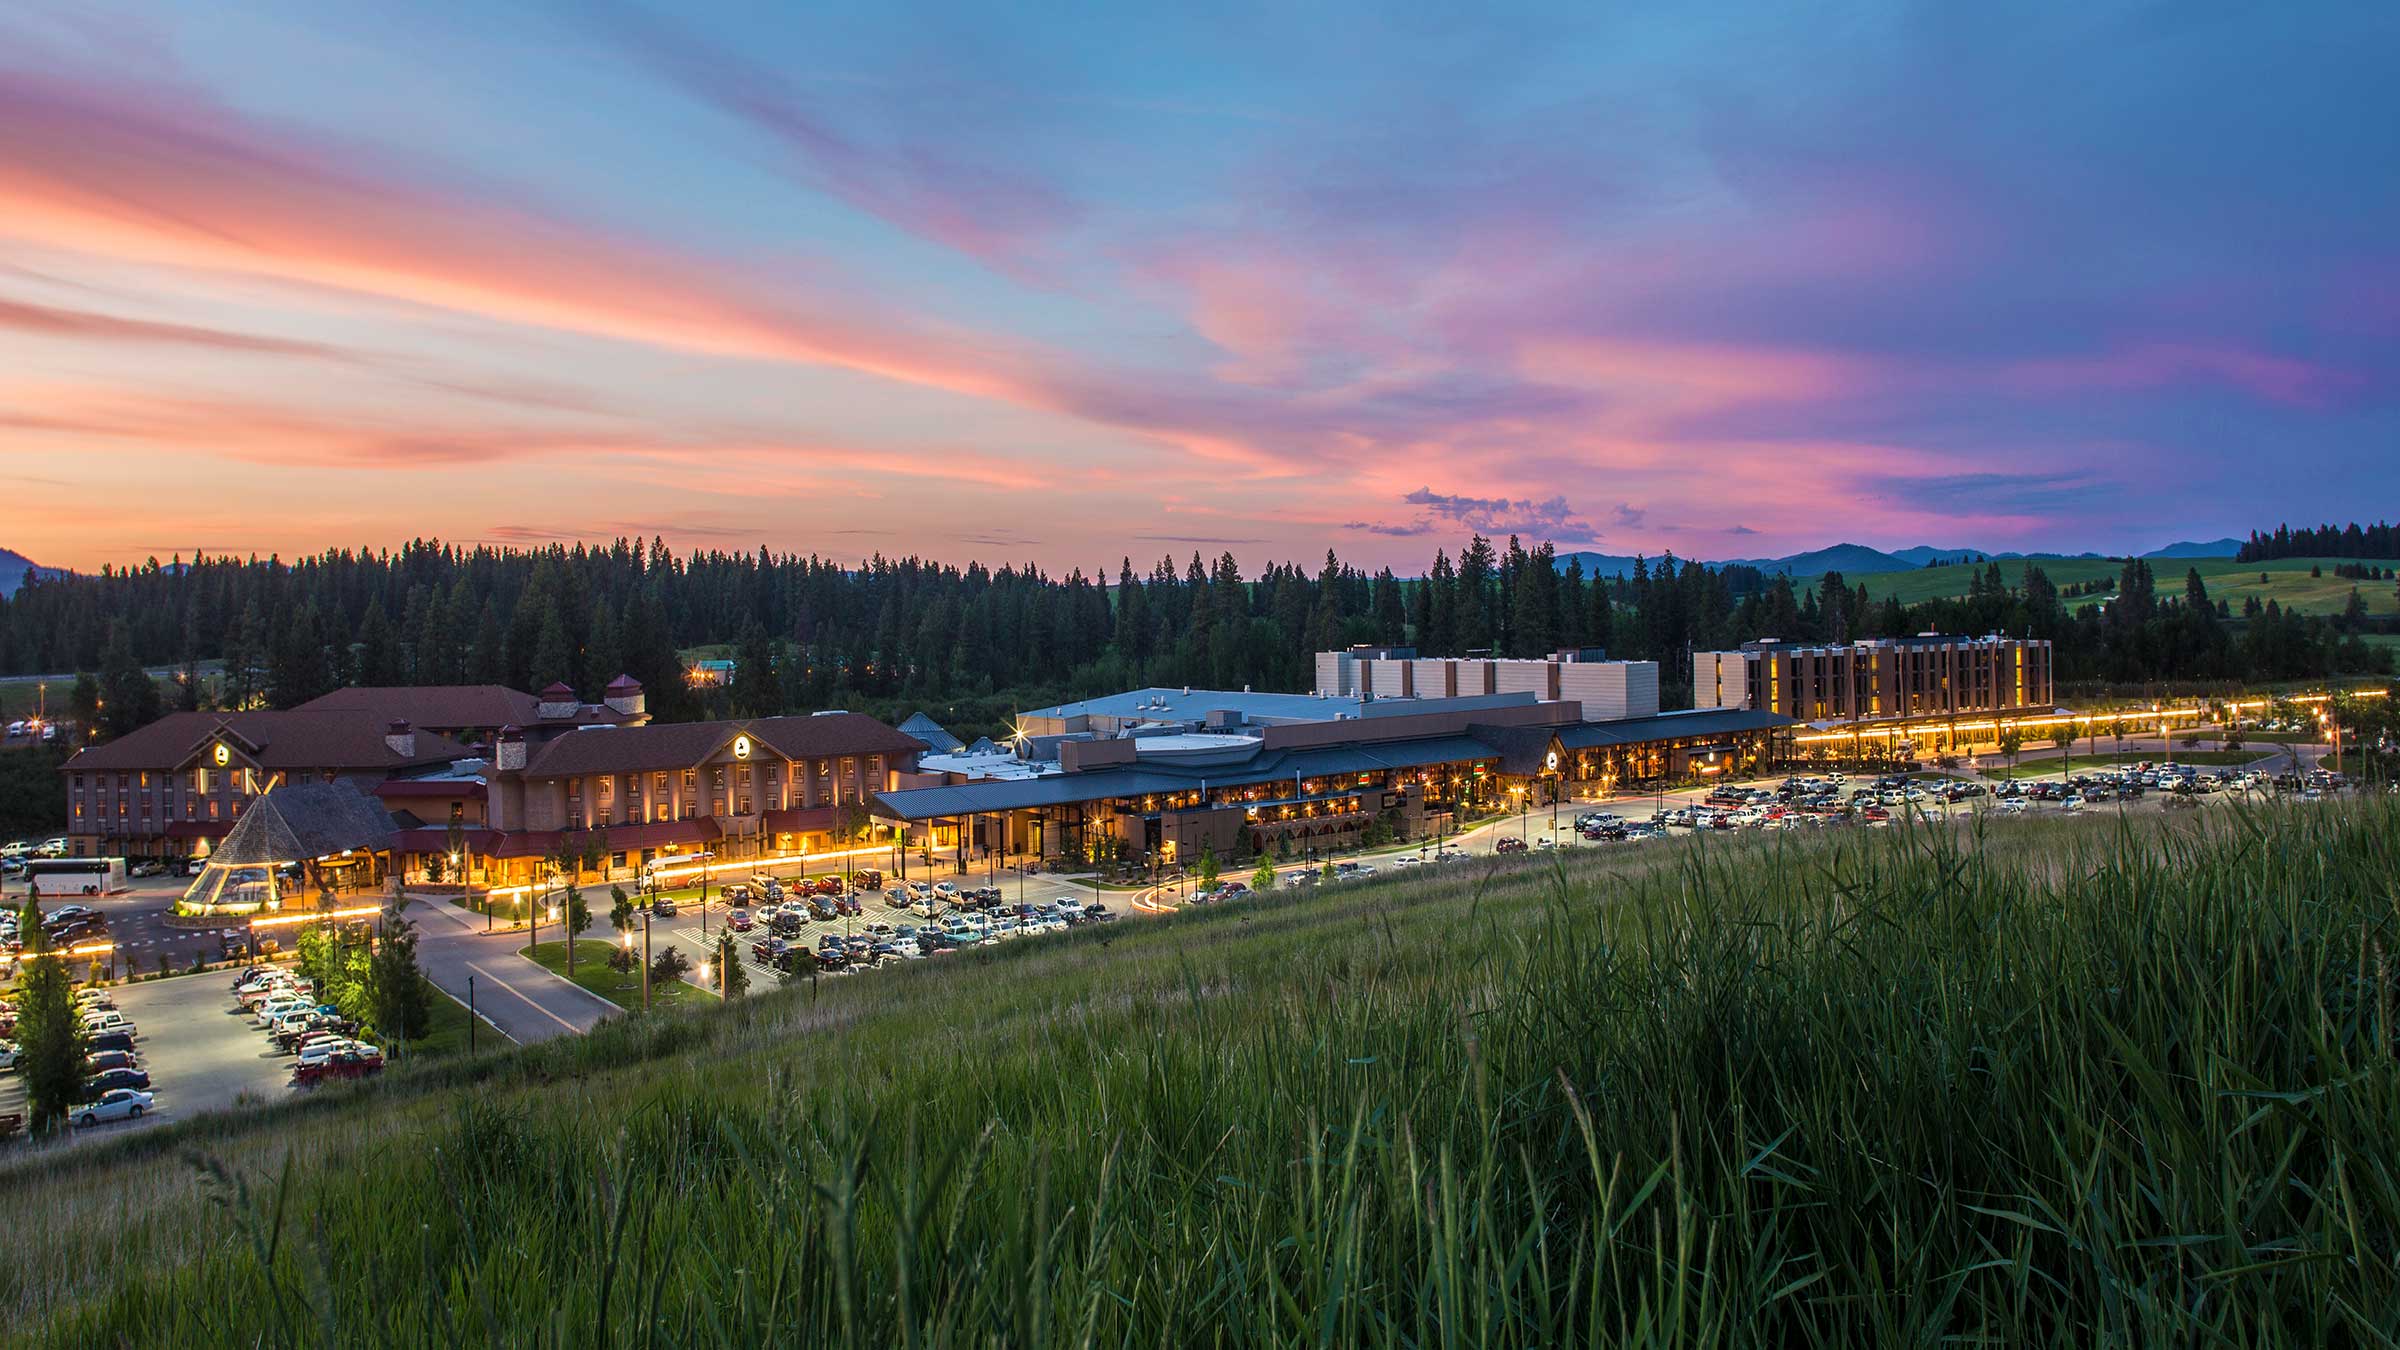 Experience Luxury and Serenity at Coeur d'Alene Resort's Hotel